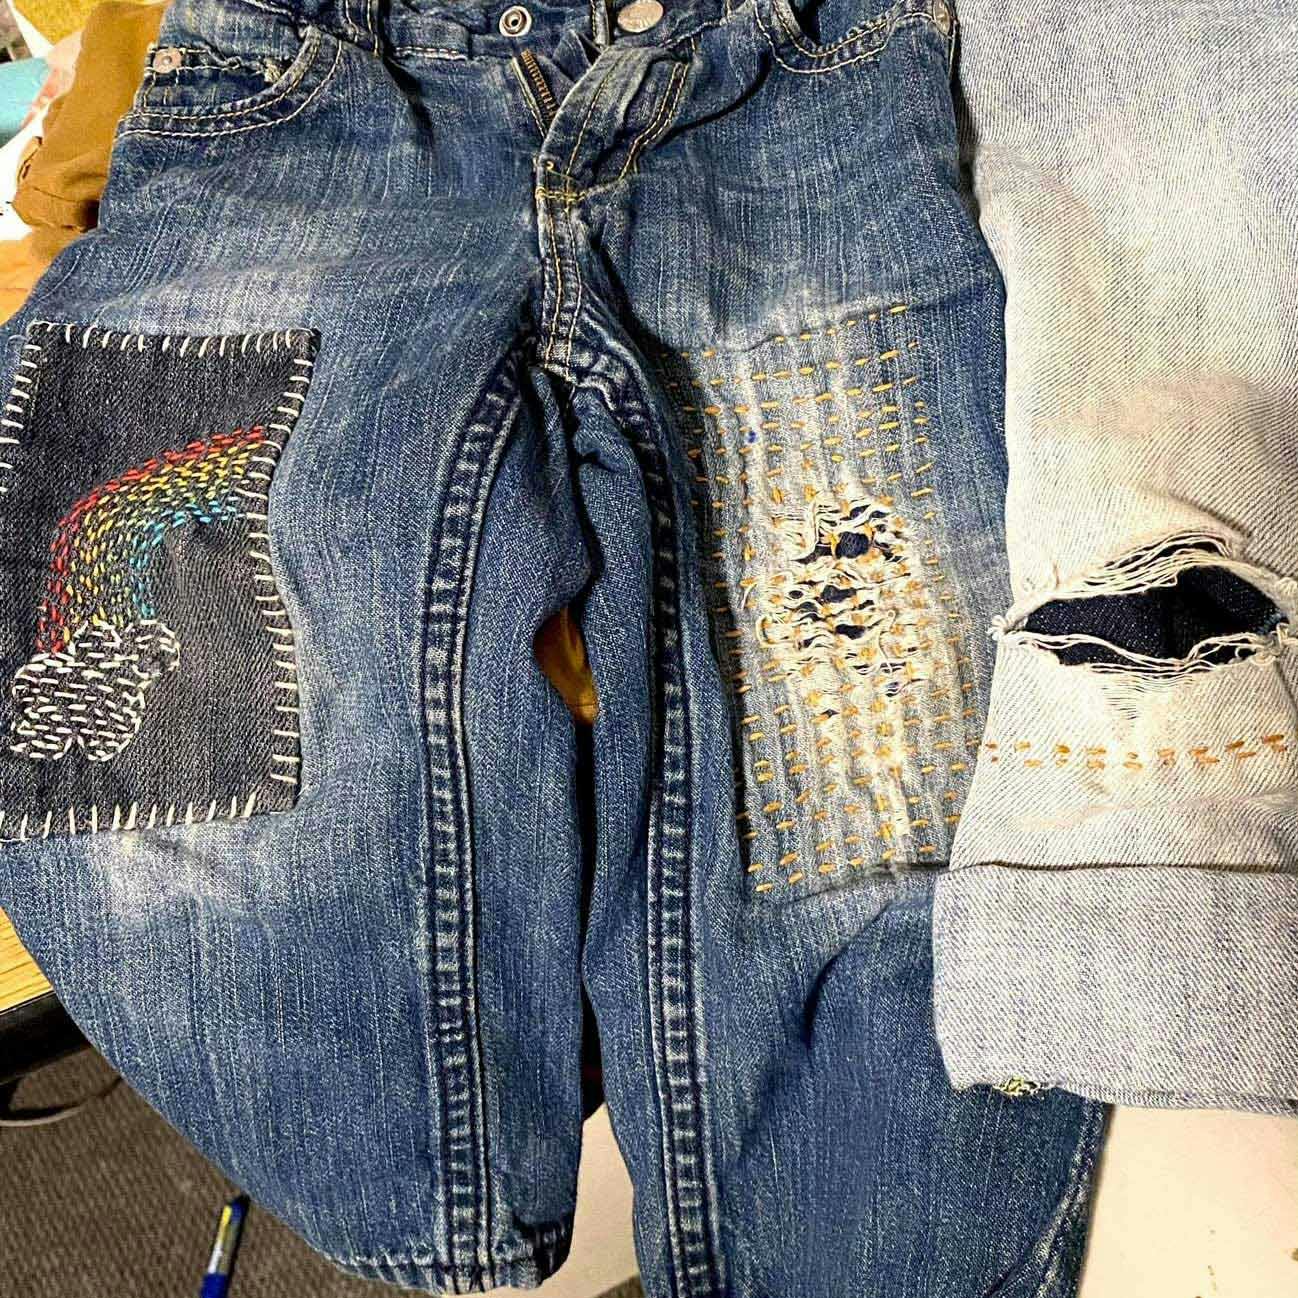 Jeans with mended thighs. One leg has a dark rectangle patch with a stitched rainbow; the other has rows of yellow stitches.